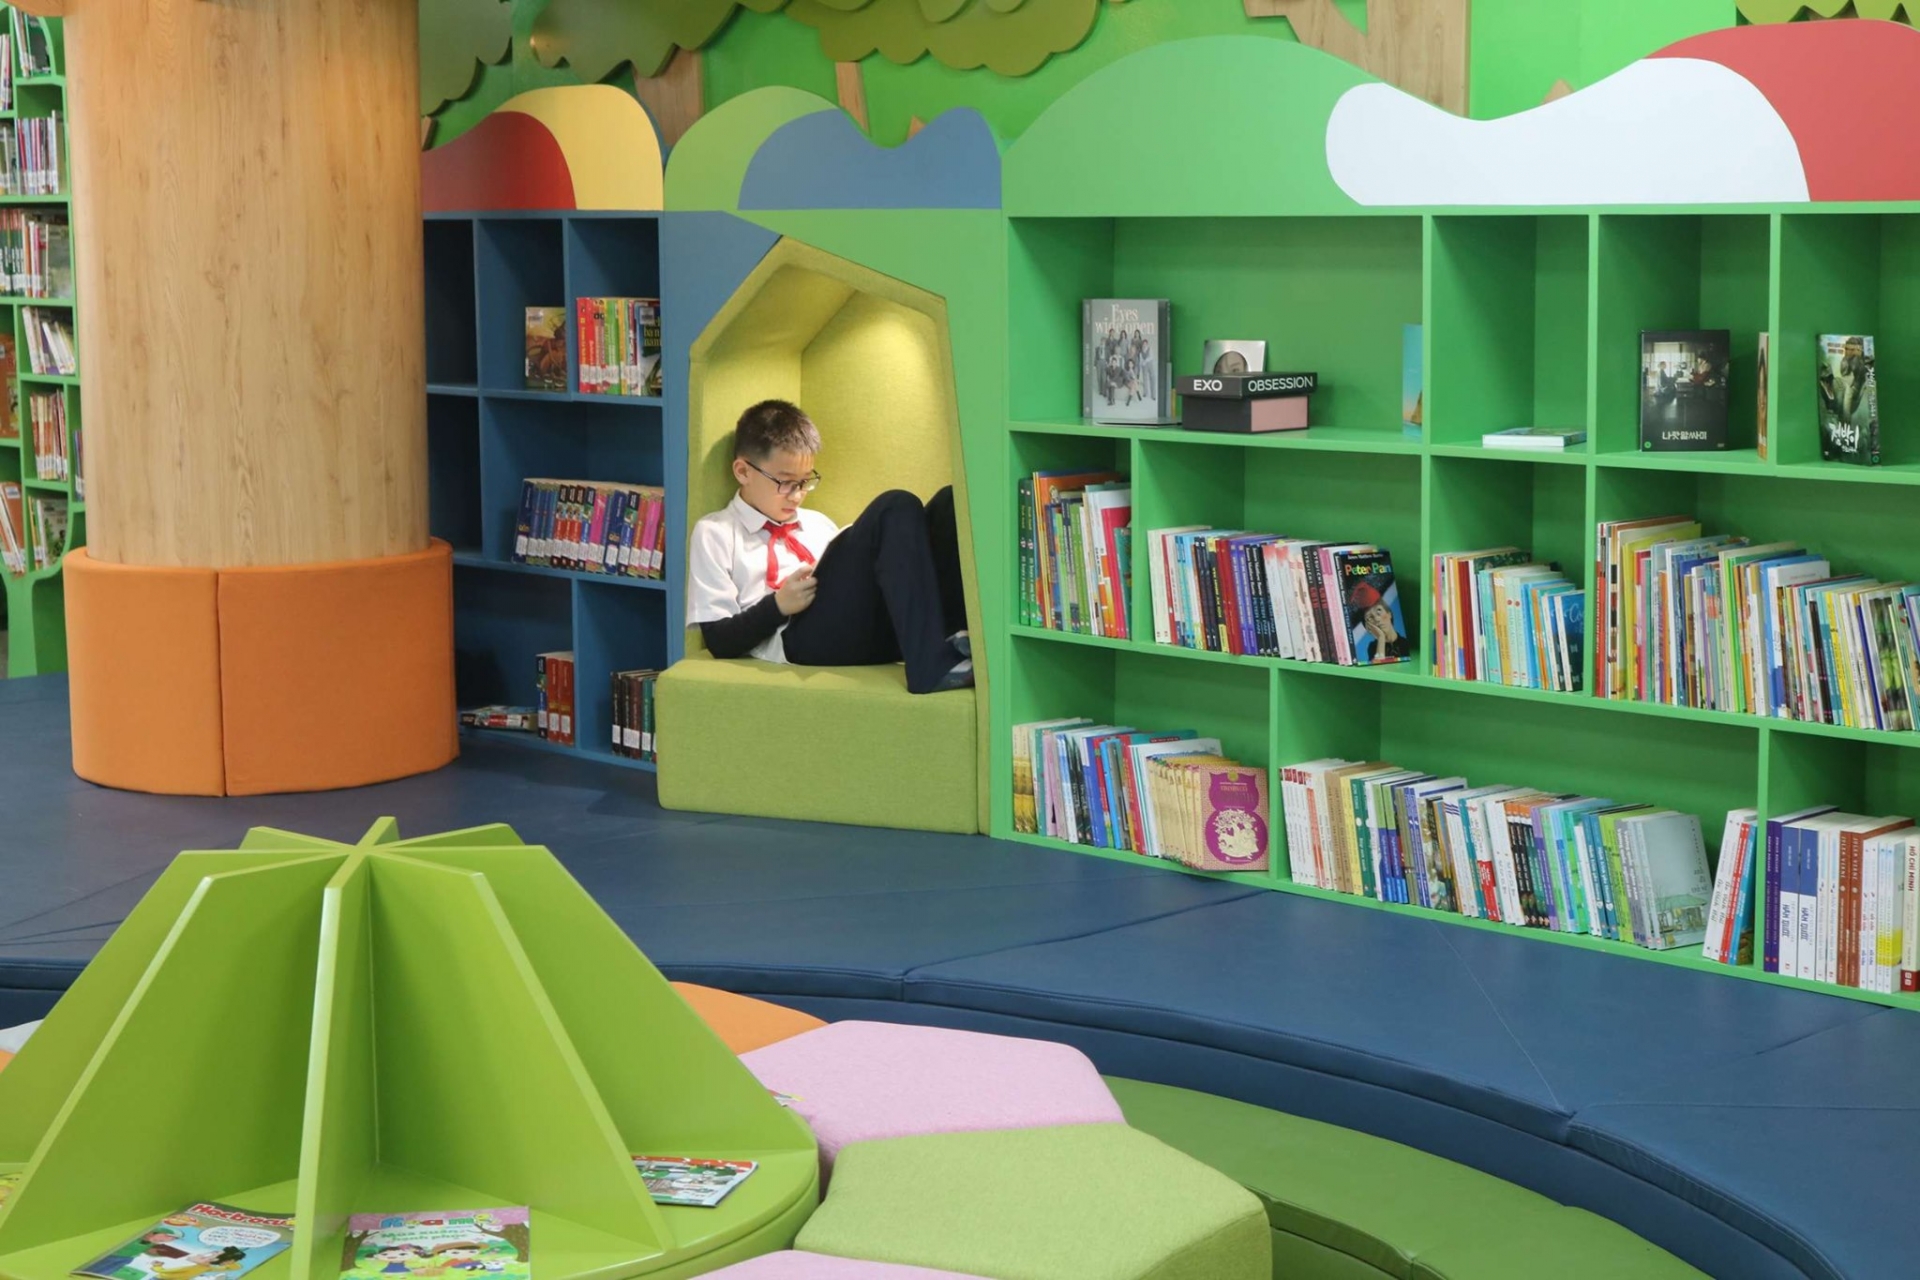 RoK sponsored Dream Plus Library launched at Hanoi Library